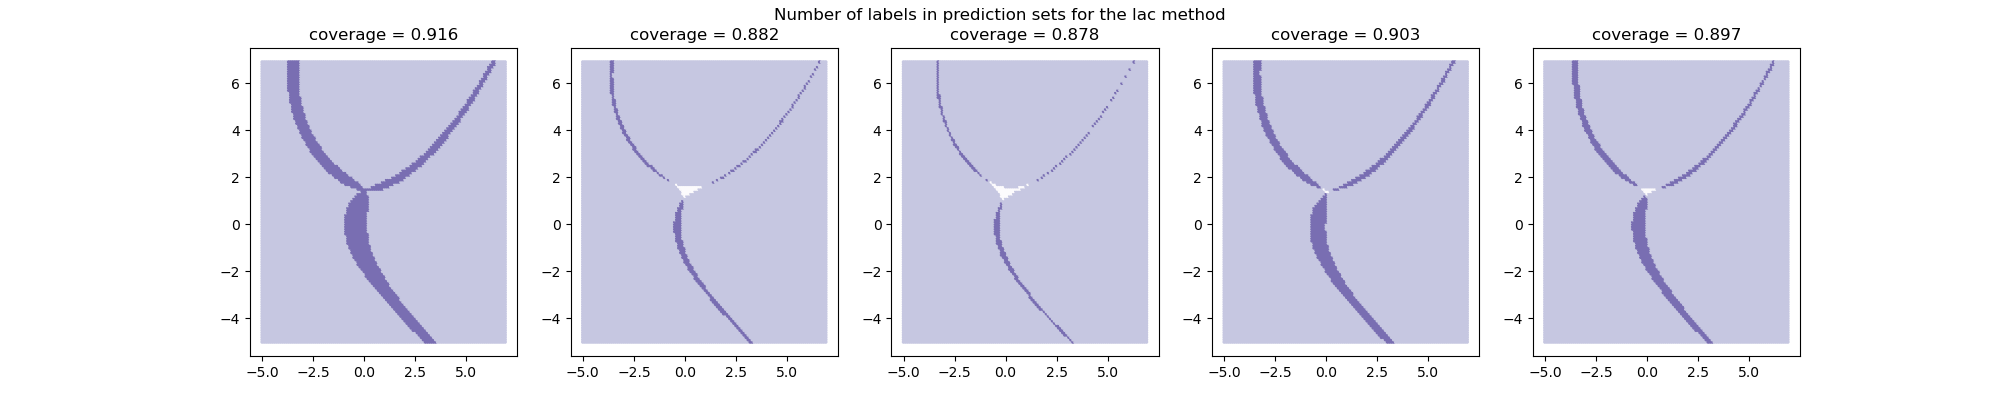 Number of labels in prediction sets for the lac method, coverage = 0.916, coverage = 0.882, coverage = 0.878, coverage = 0.903, coverage = 0.897